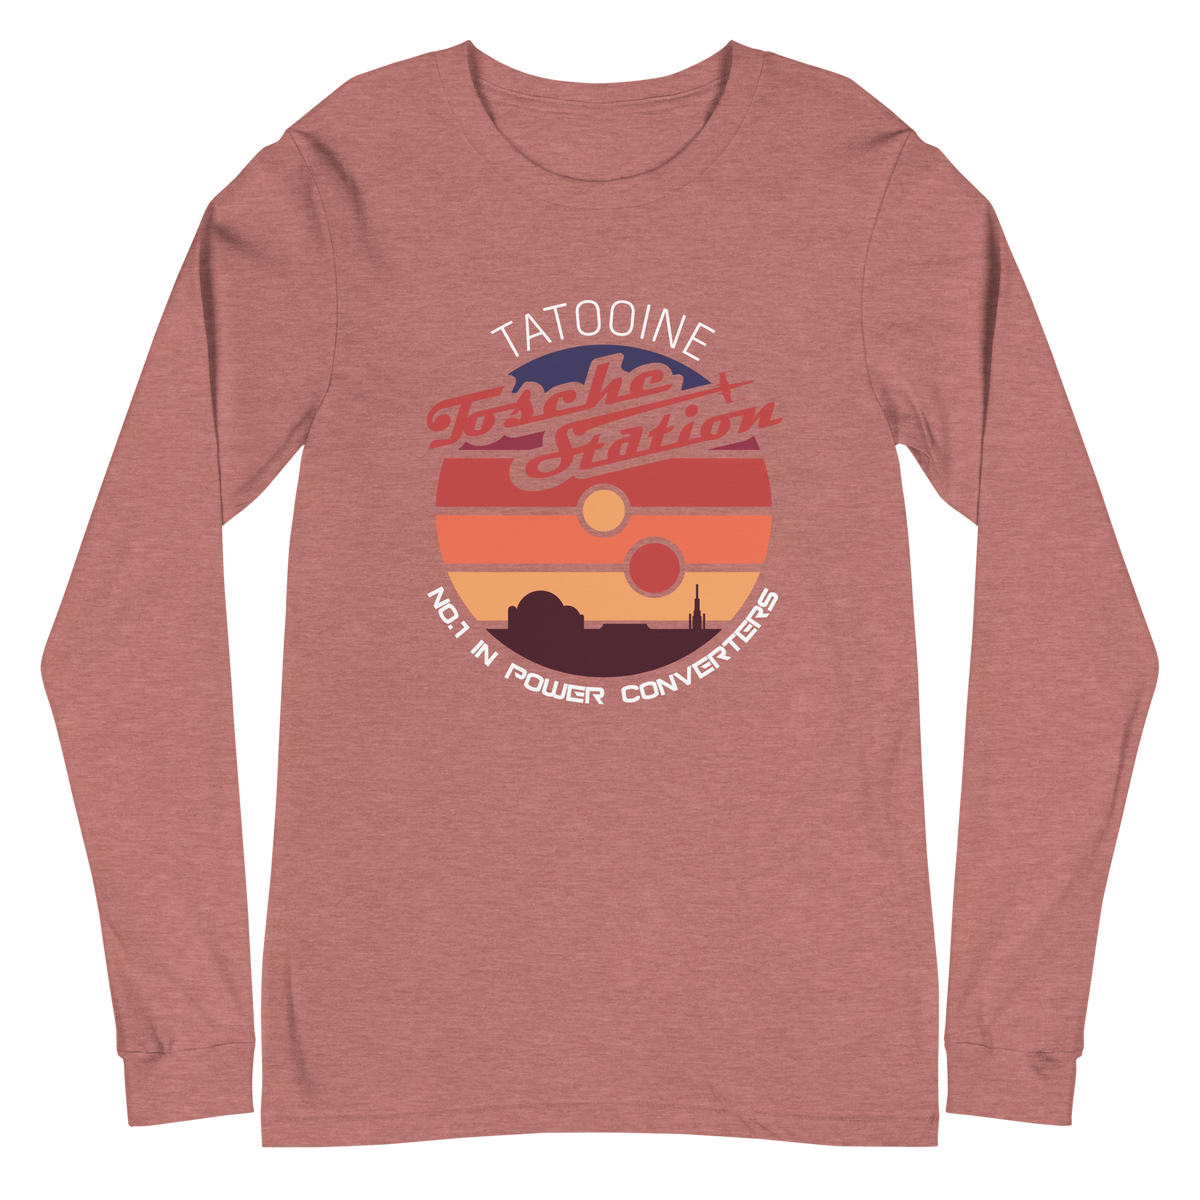 Tatooine Tosche Station Long Sleeve